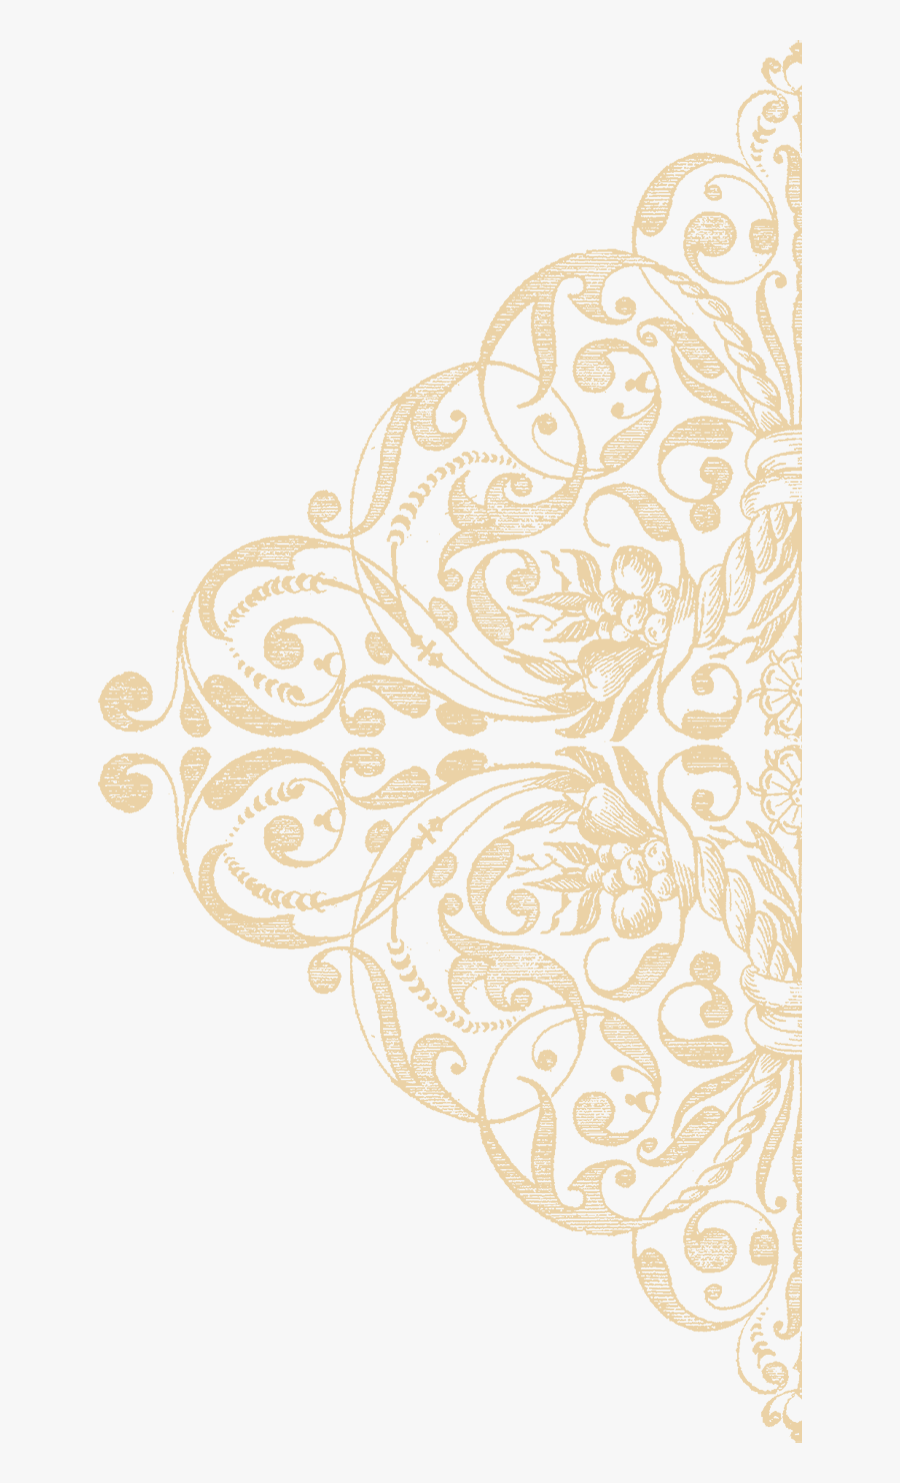 Lace Gold Pattern Ornament Mapping Texture Clipart - Gold Pattern Transparent Background, Transparent Clipart